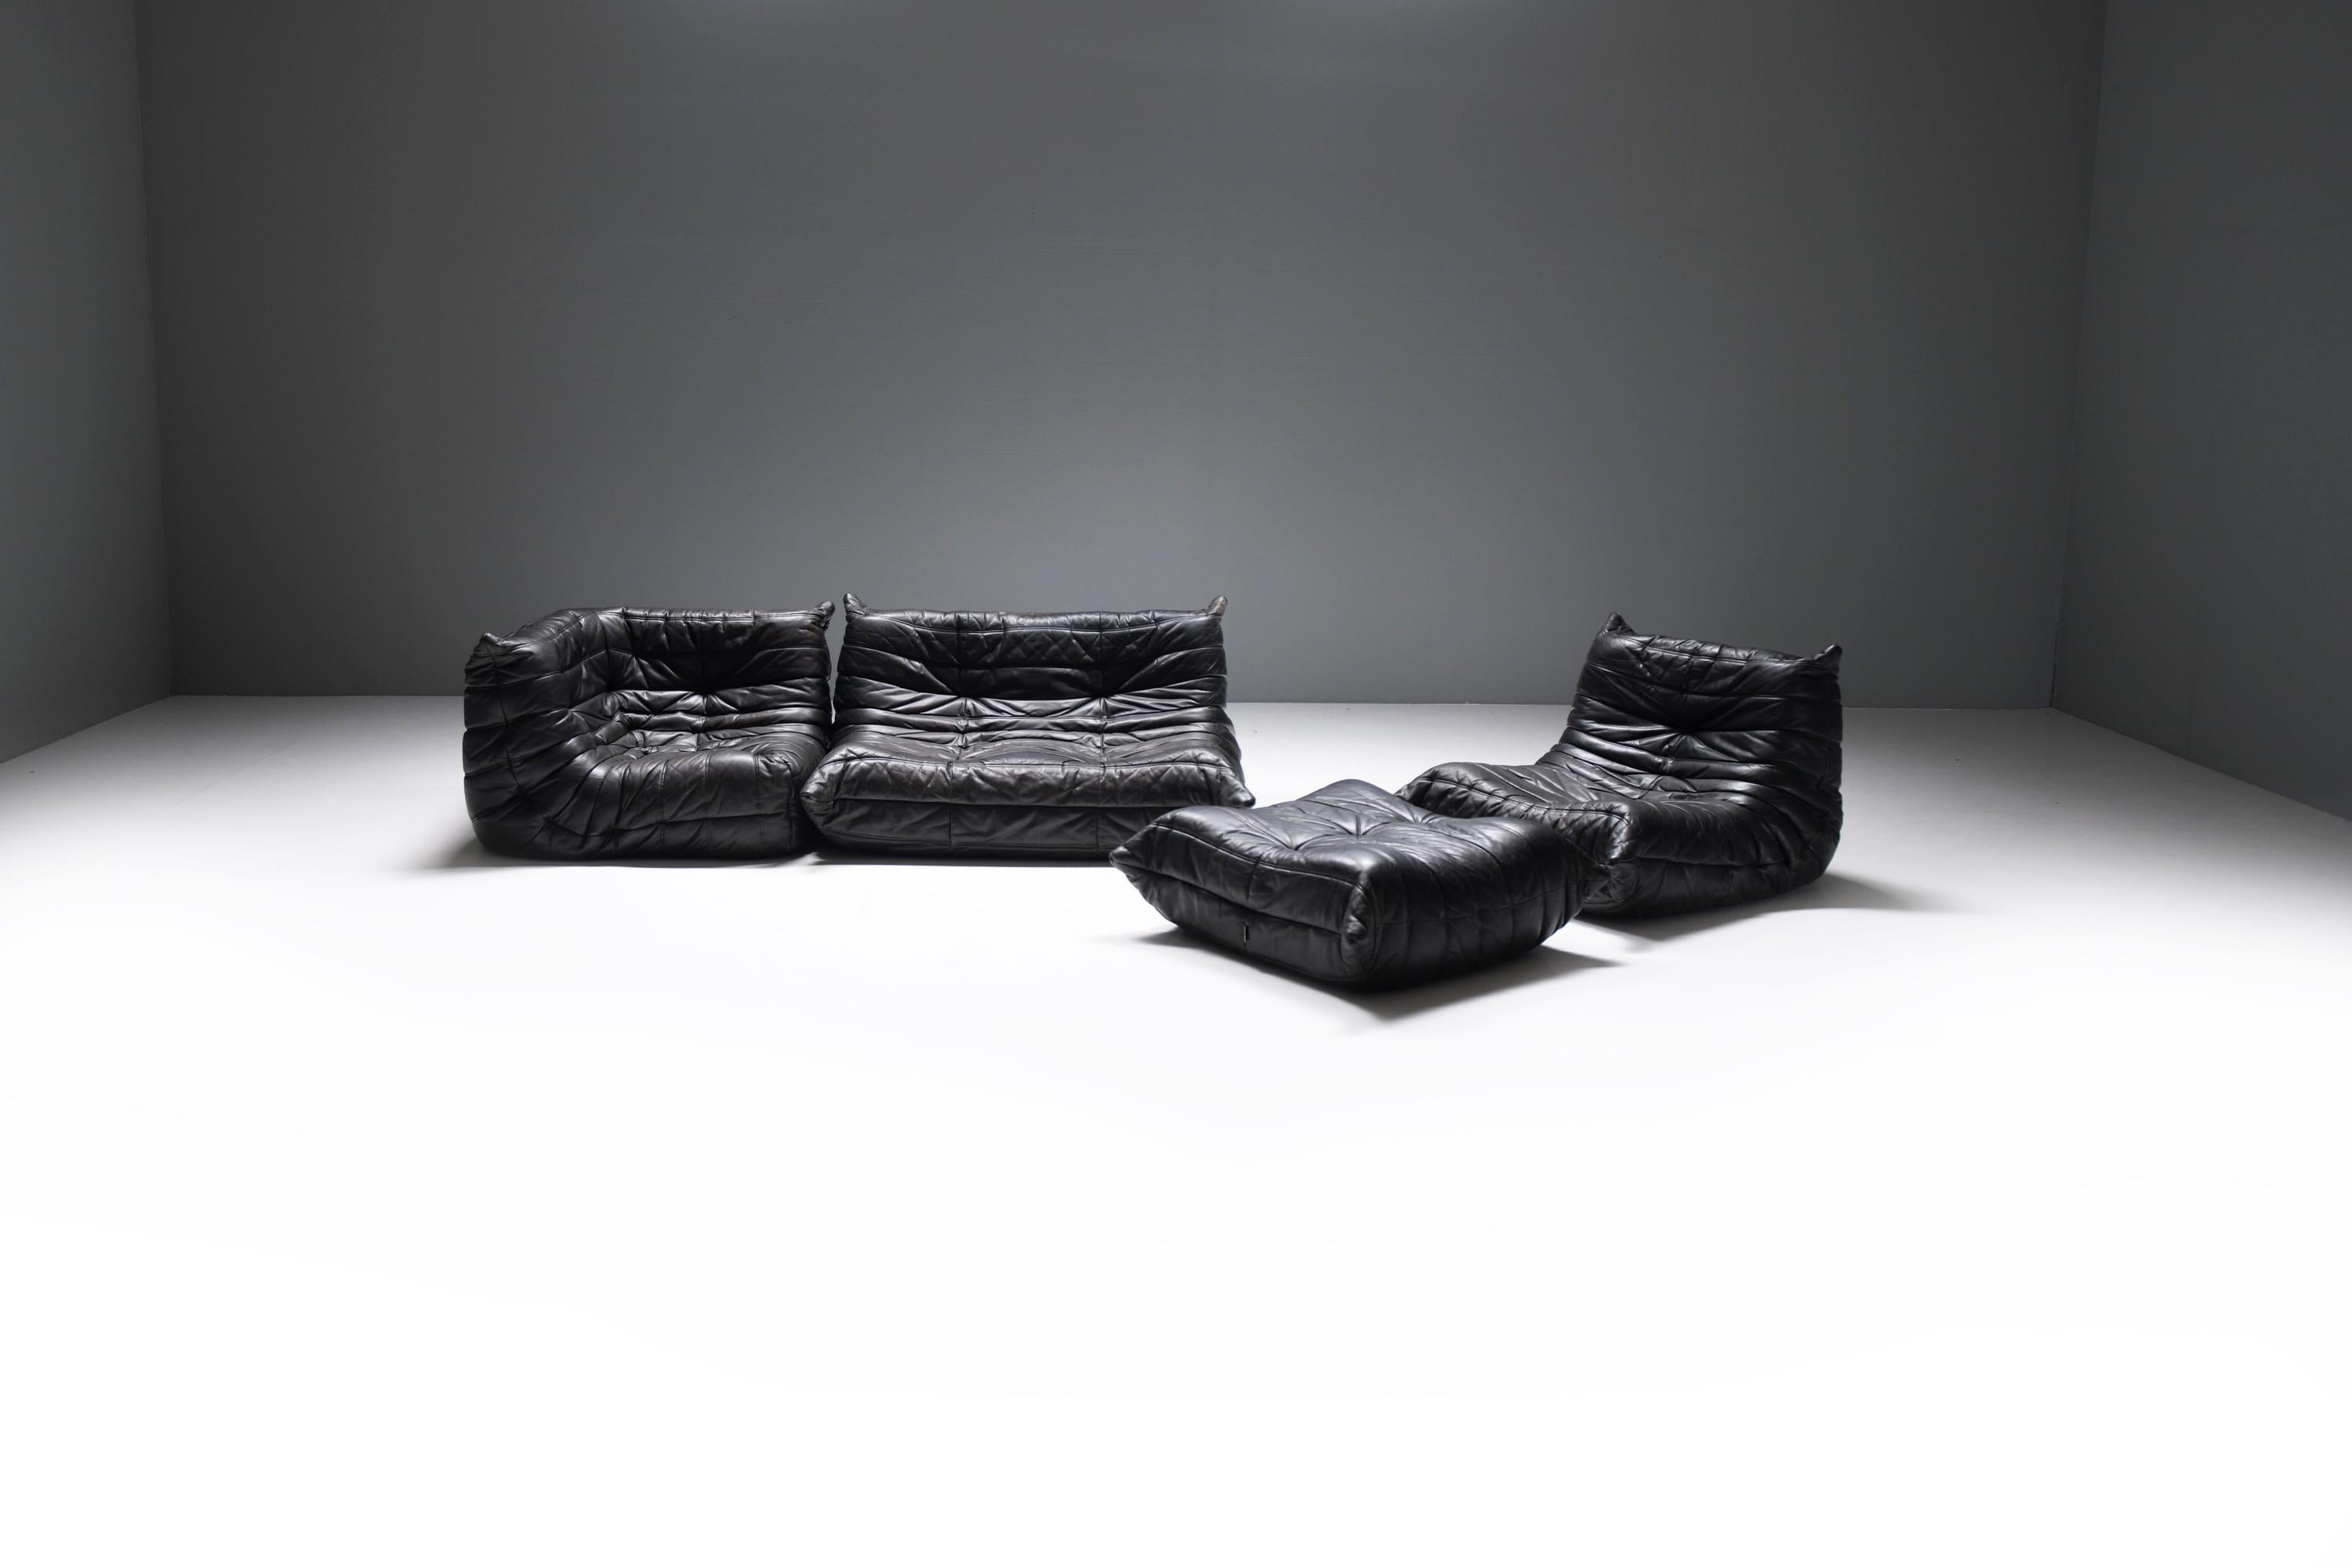 Stunning vintage TOGO set in its original, soft black leather with the perfect patina.
From its first owner (1989)  Still 100% original! Matching set!
Designed by Michel Ducaroy for Ligne Roset France l Aèra-lab Belgium

The TOGO sofa, designed by